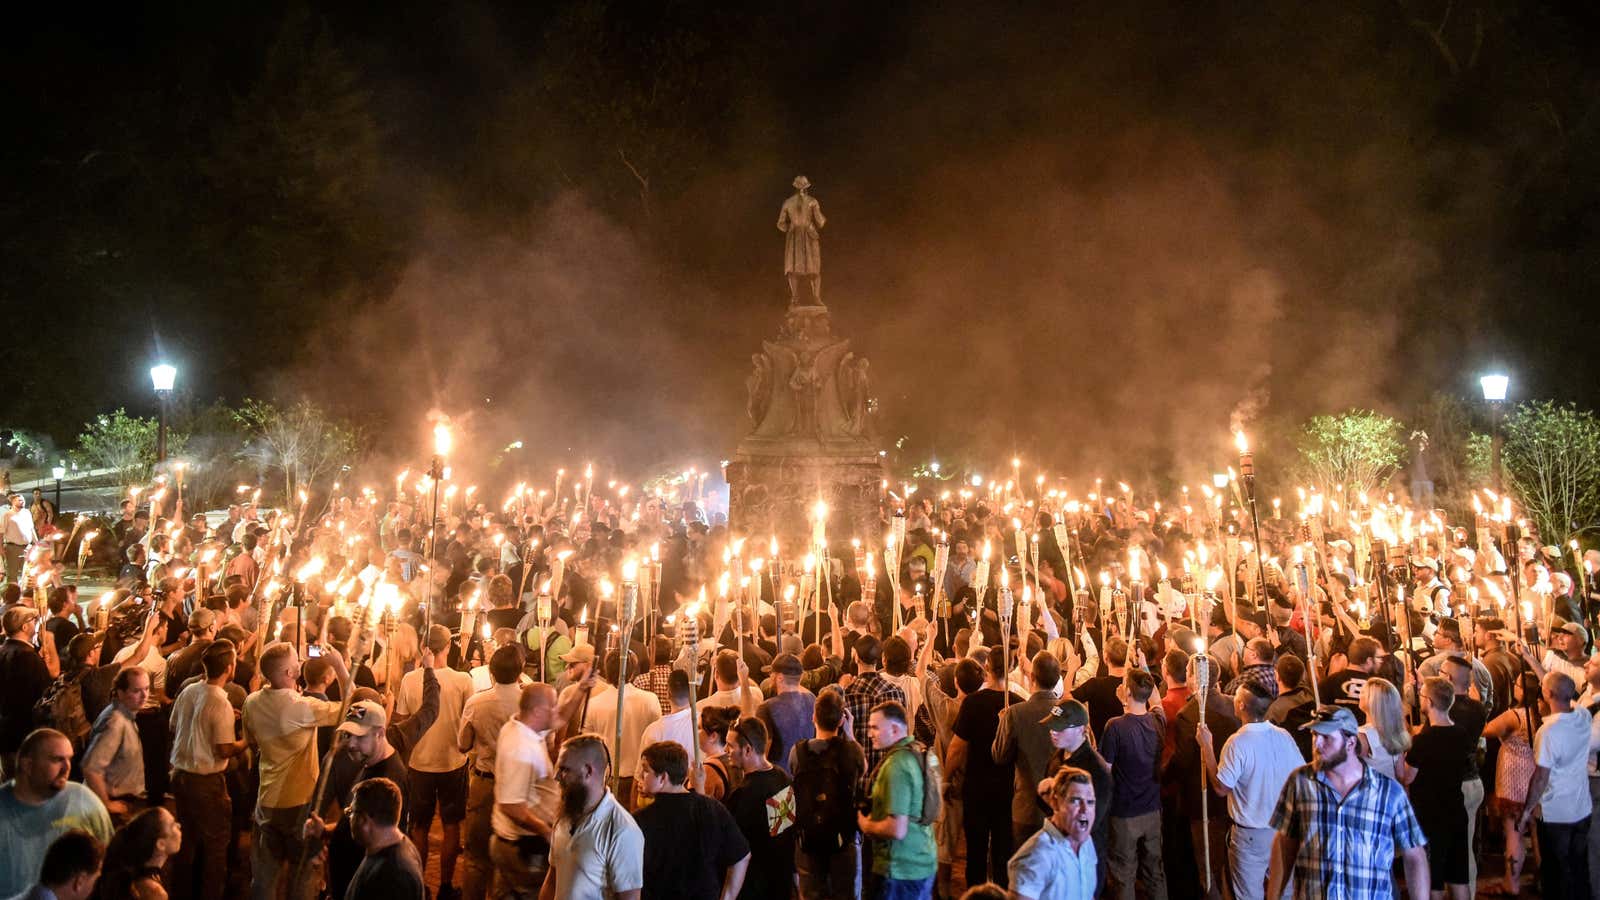 Track how racist rallies like Charlottesville get started.